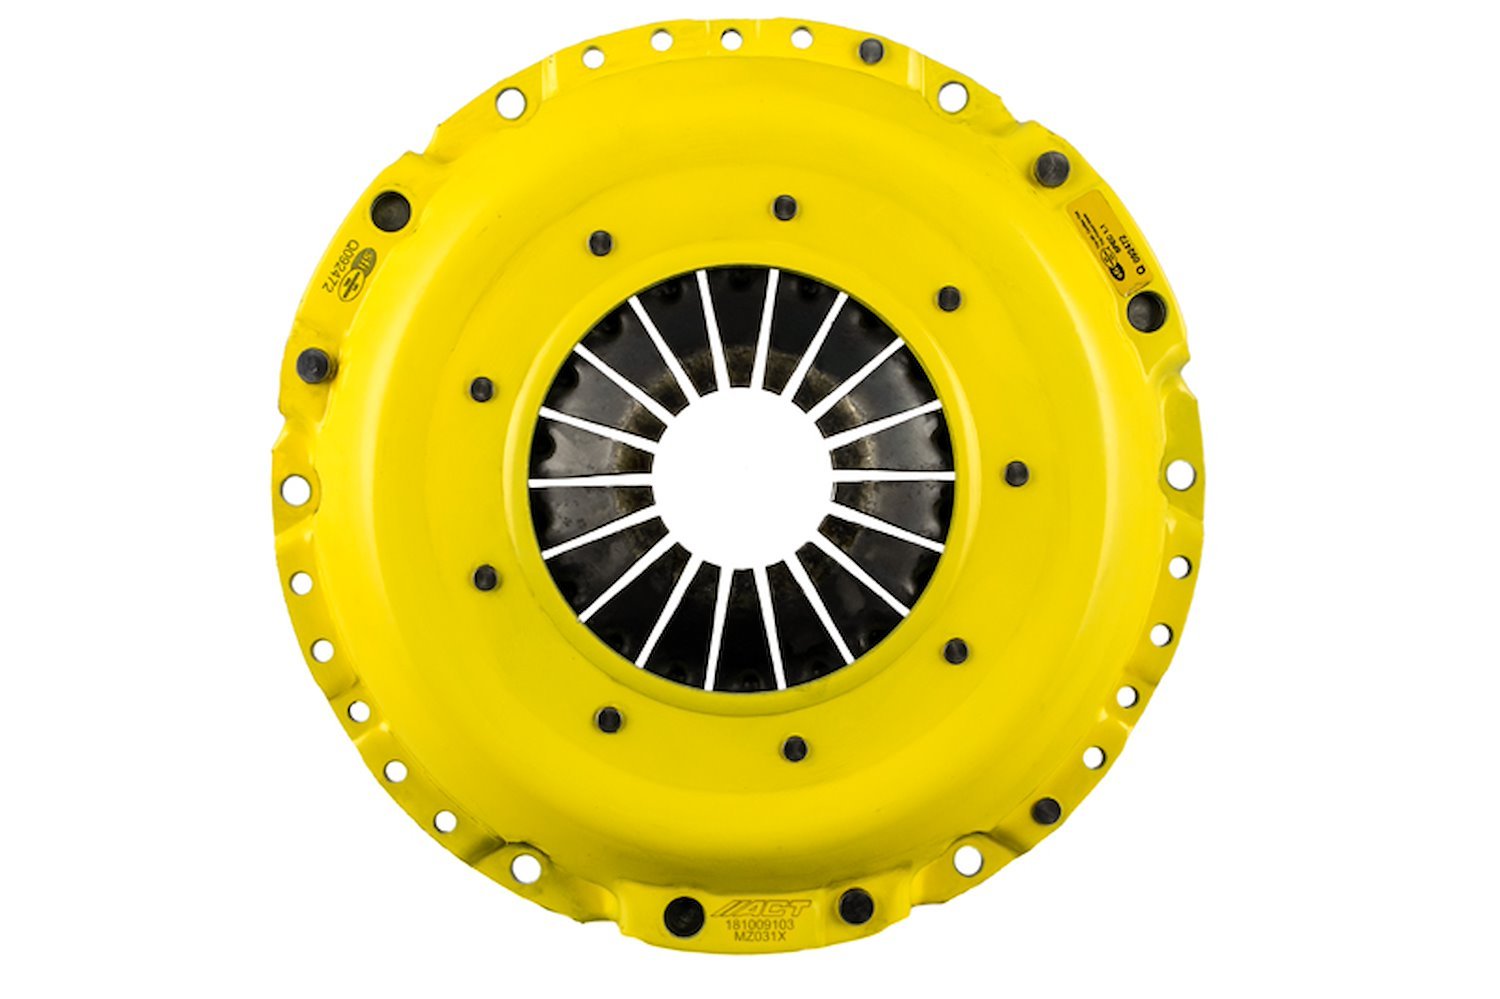 Xtreme Transmission Clutch Pressure Plate Fits Select Ford/Lincoln/Mercury/Mazda